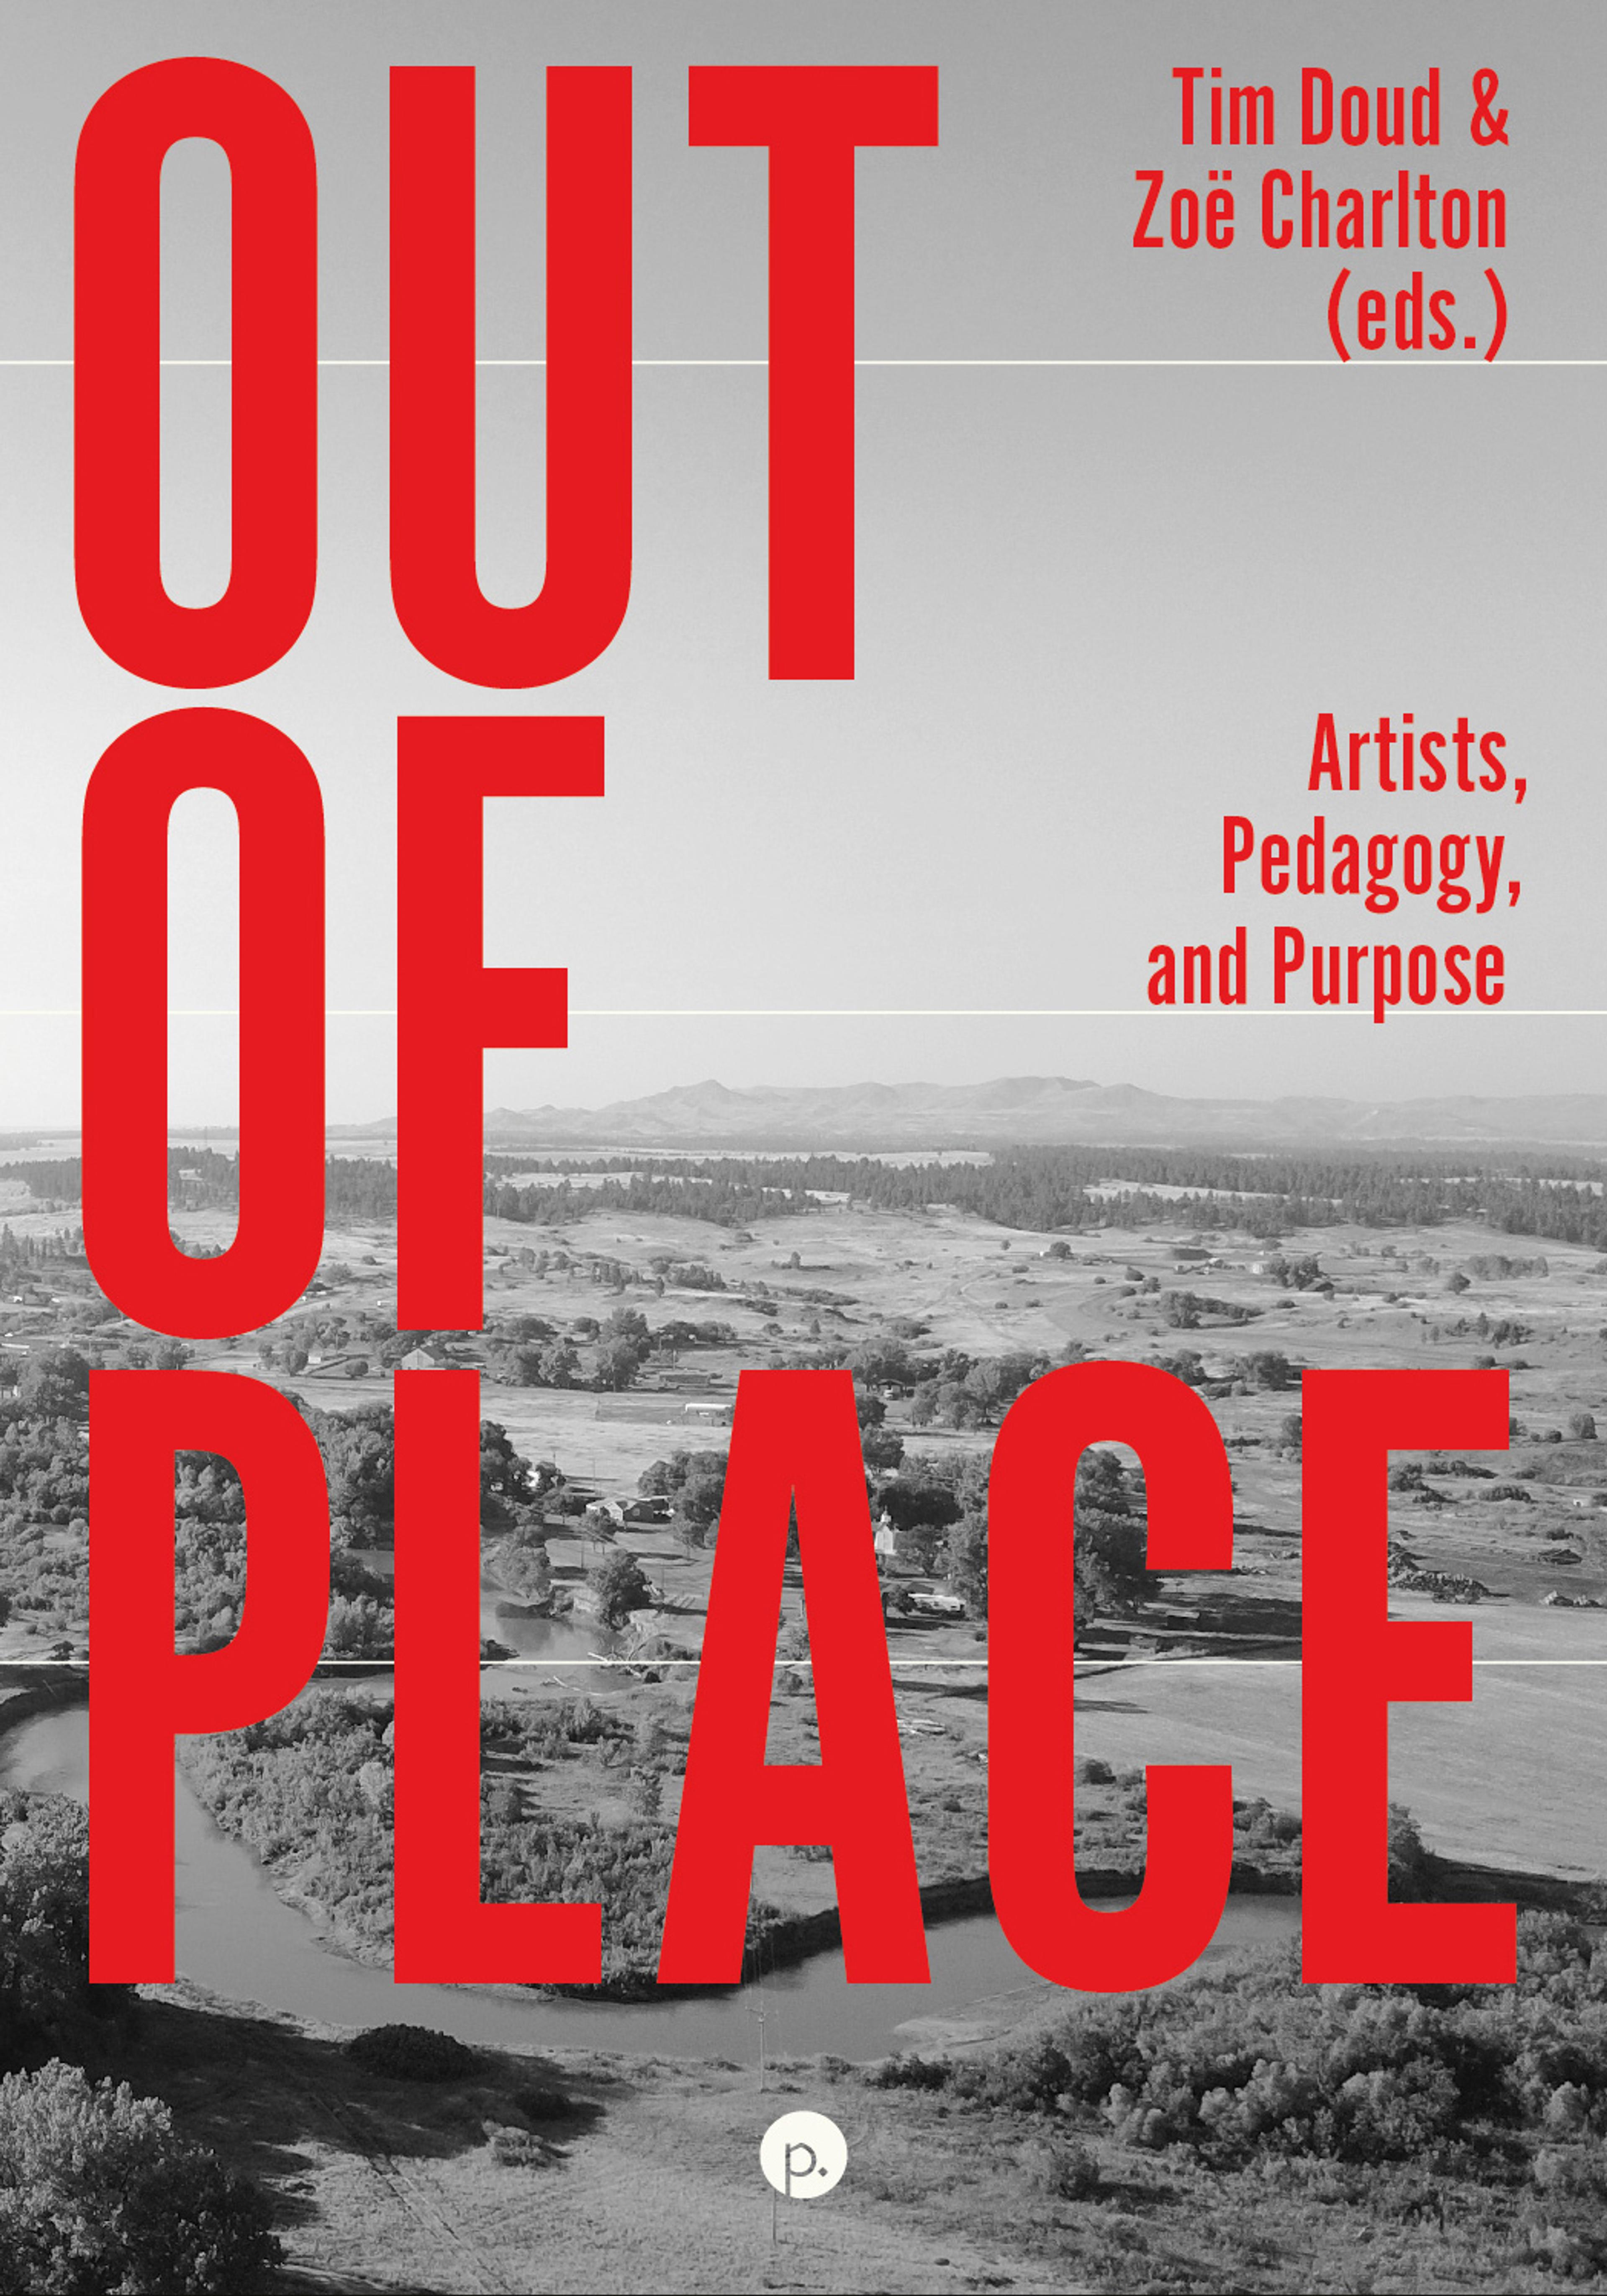 Cover of book titled Out of Place: Artists, Pedagogy, and Purpose